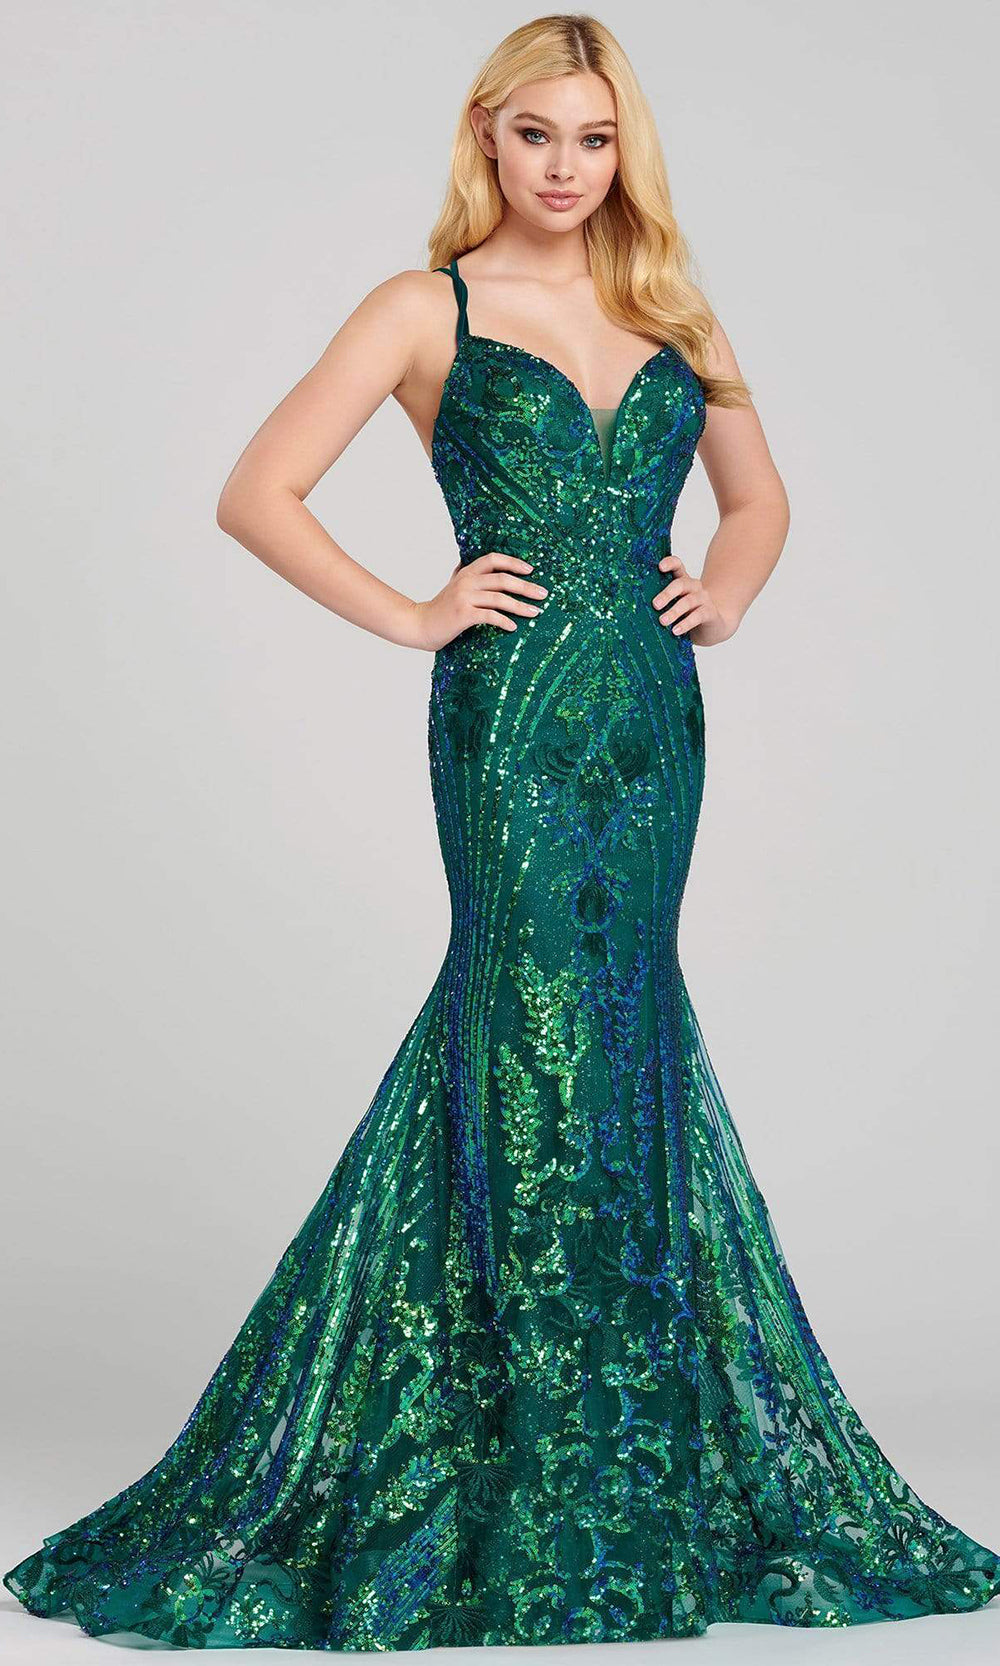 Ellie Wilde - Strappy Sequined Trumpet Evening Dress EW120028 - 1 pc Emerald In Size 10 Available CCSALE 10 / Emerald